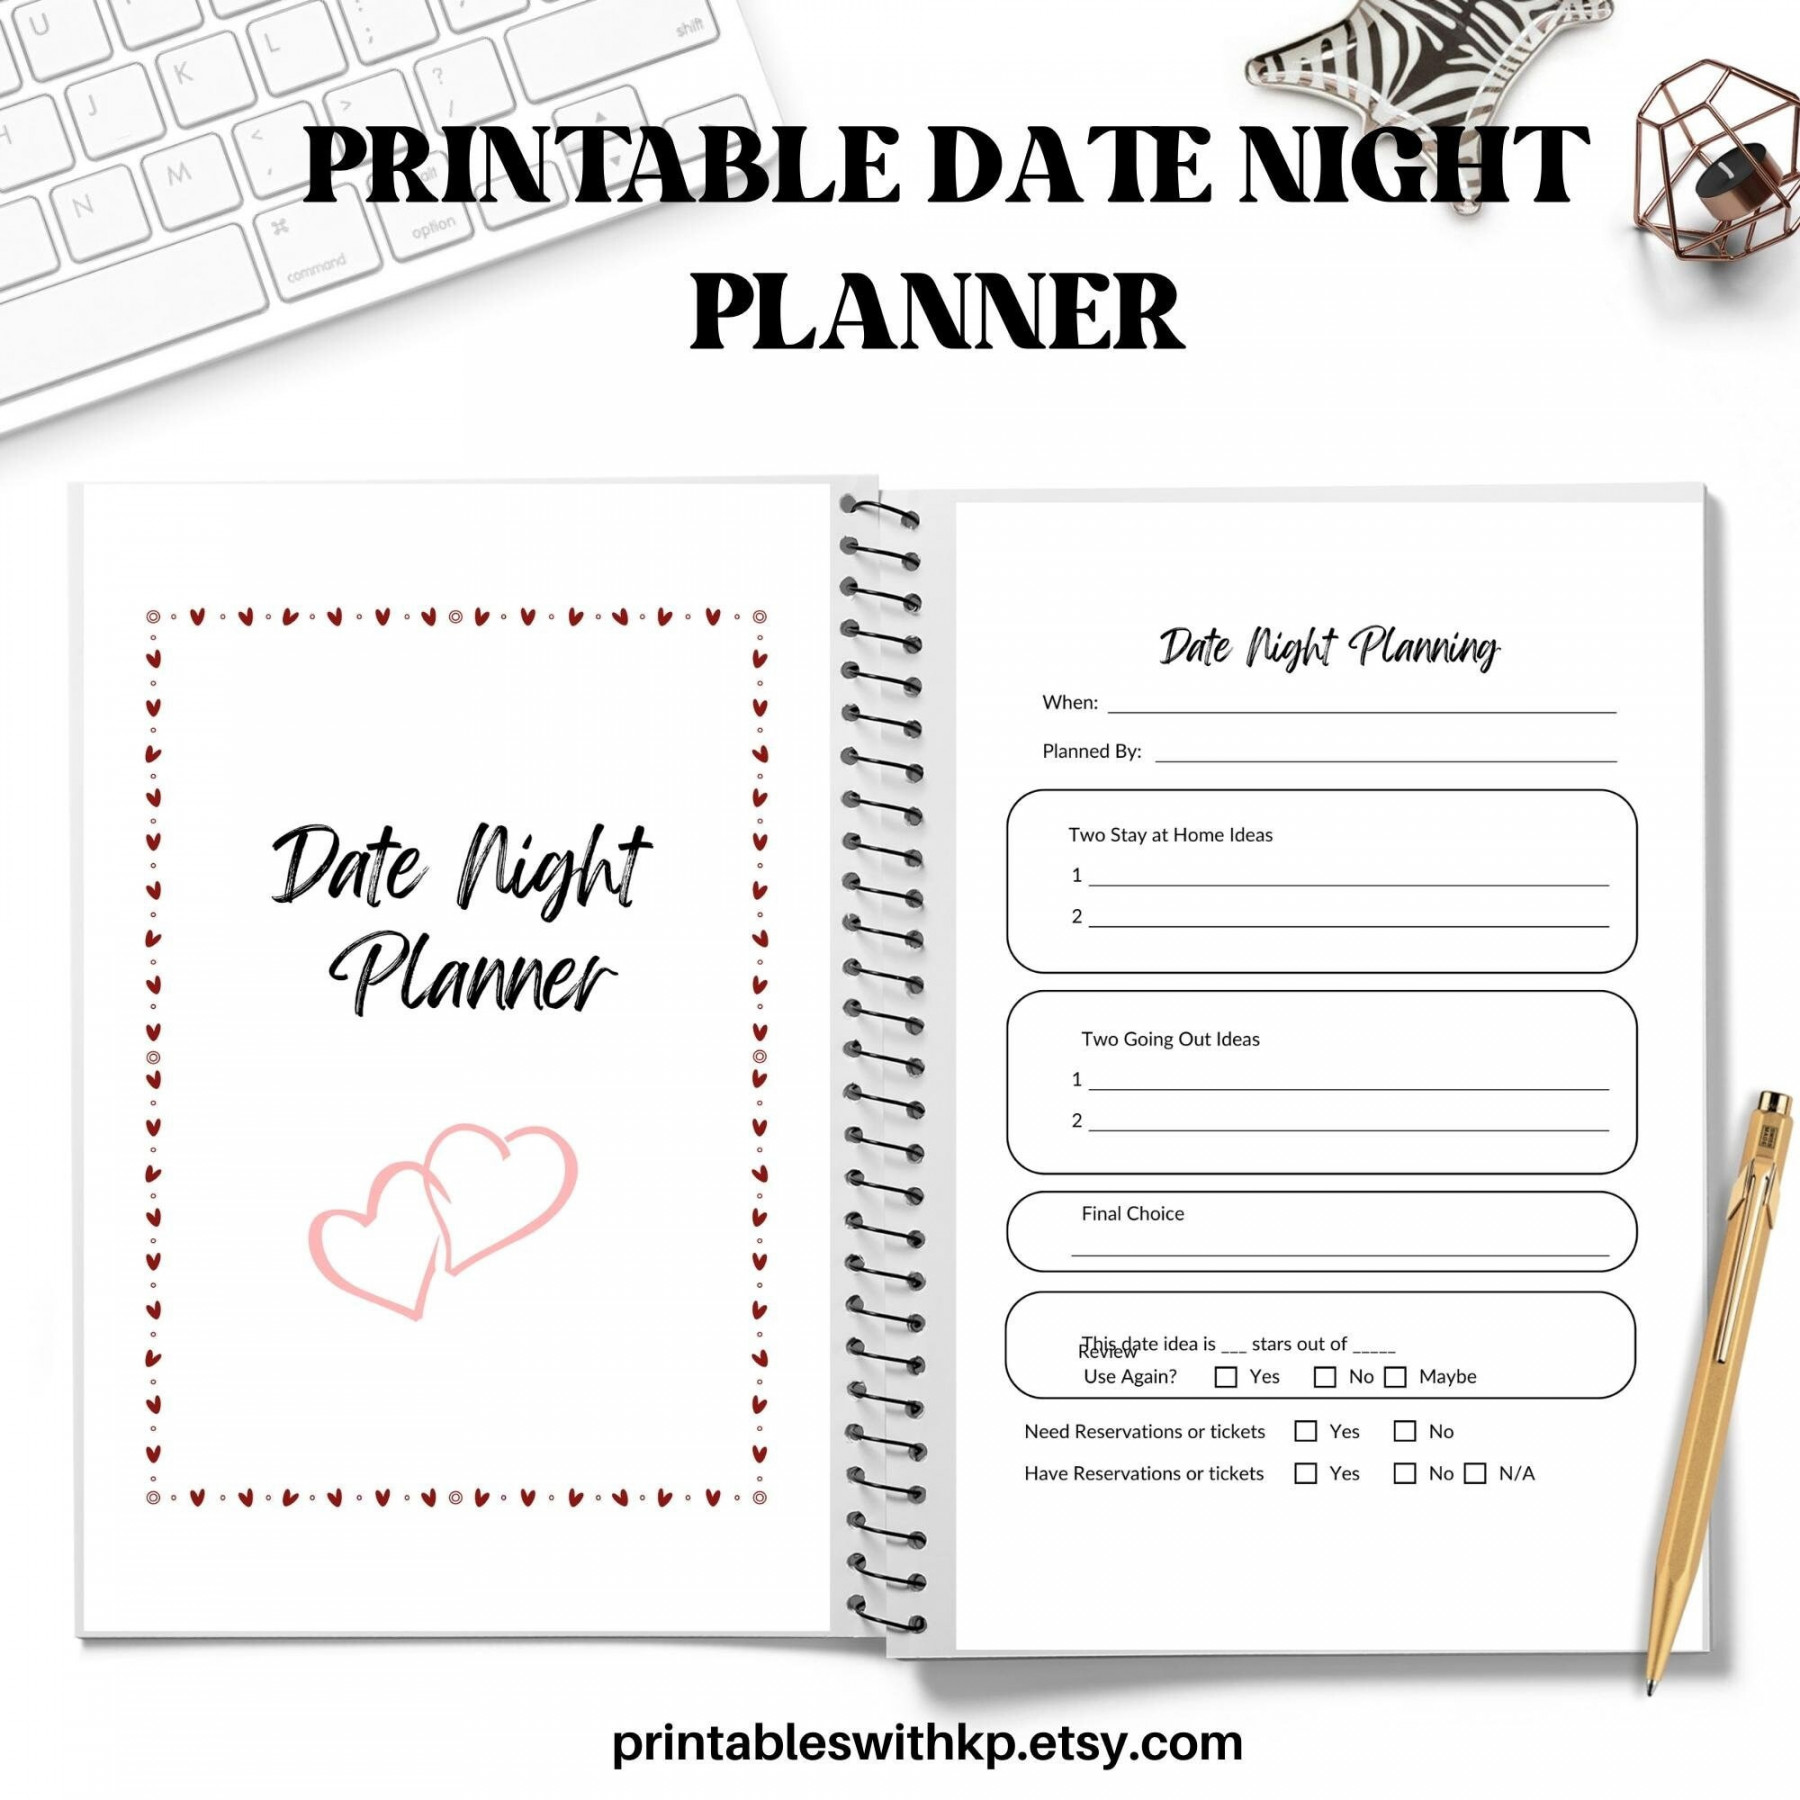 Printable Date Night Planner With Date Night Ideas, Reflection